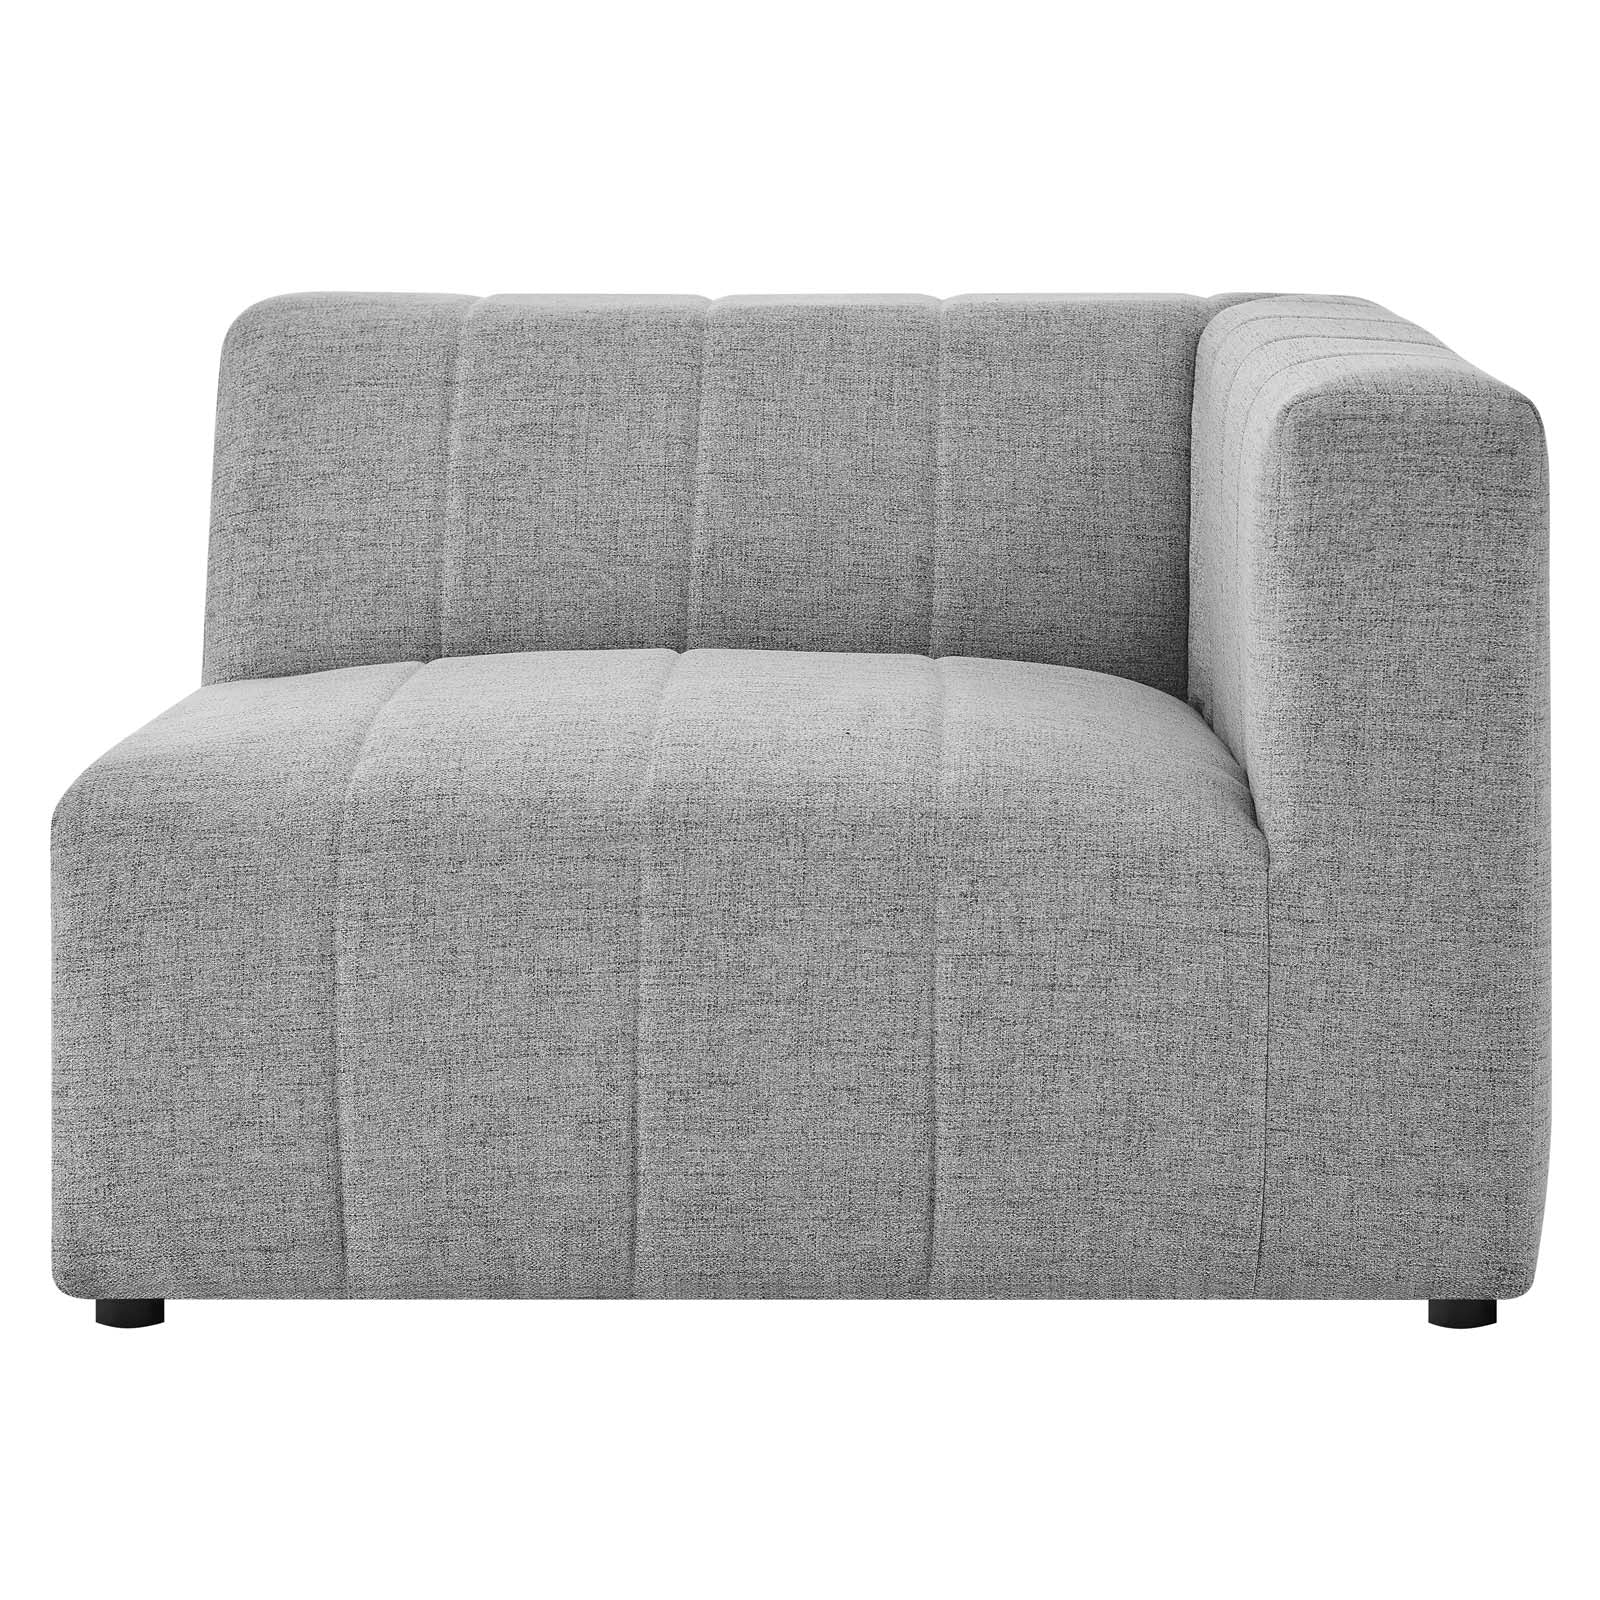 Modway Sofas & Couches - Bartlett Upholstered Fabric 3-Piece Sofa Light Gray